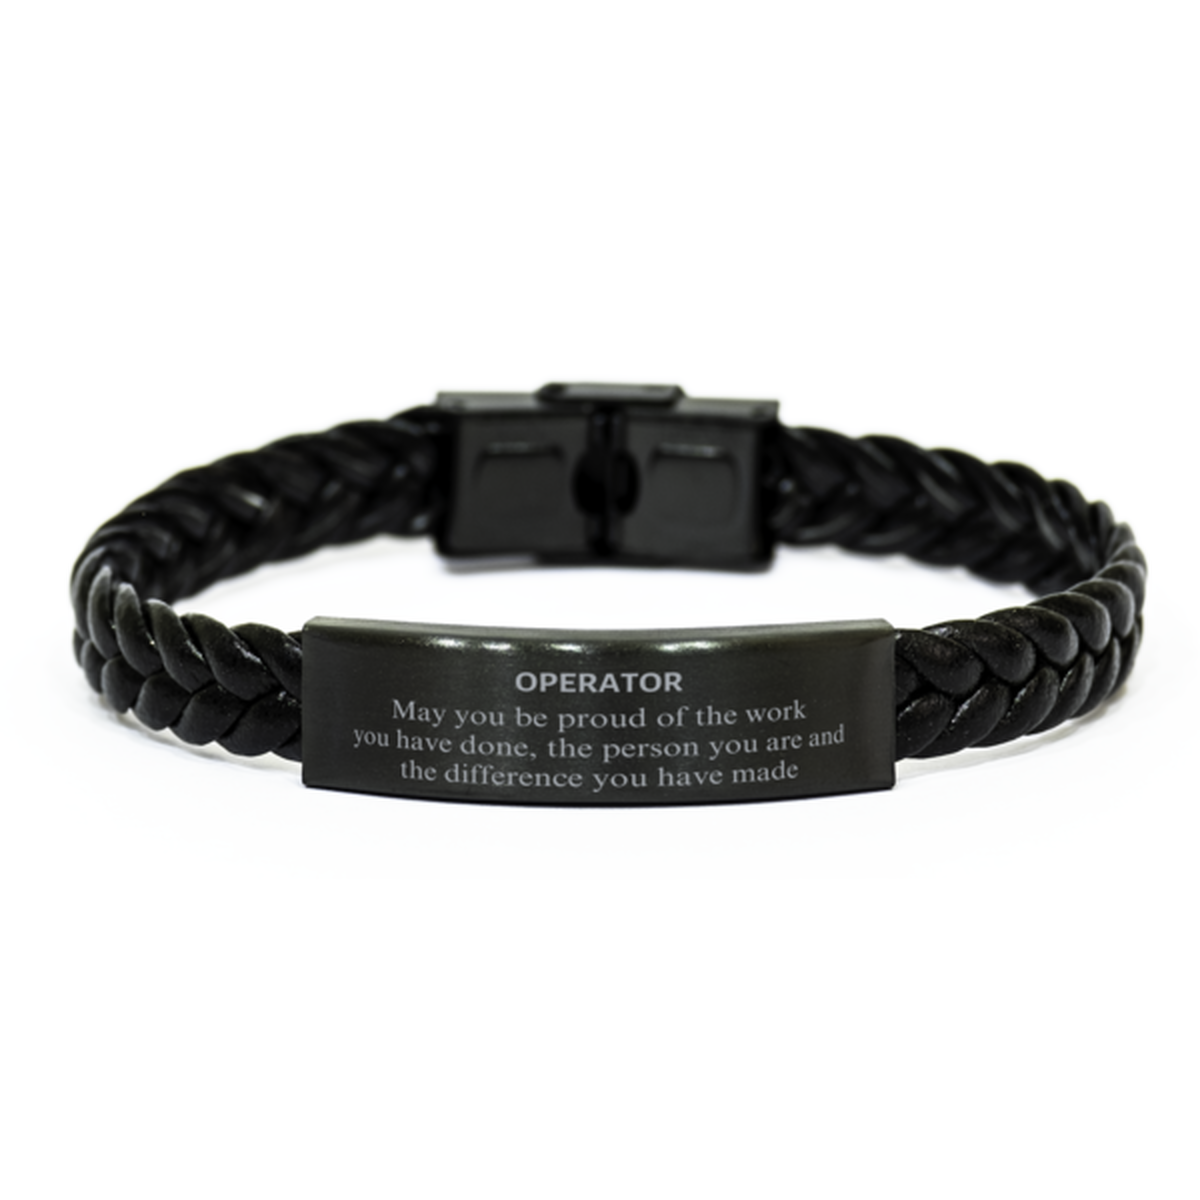 Operator May you be proud of the work you have done, Retirement Operator Braided Leather Bracelet for Colleague Appreciation Gifts Amazing for Operator